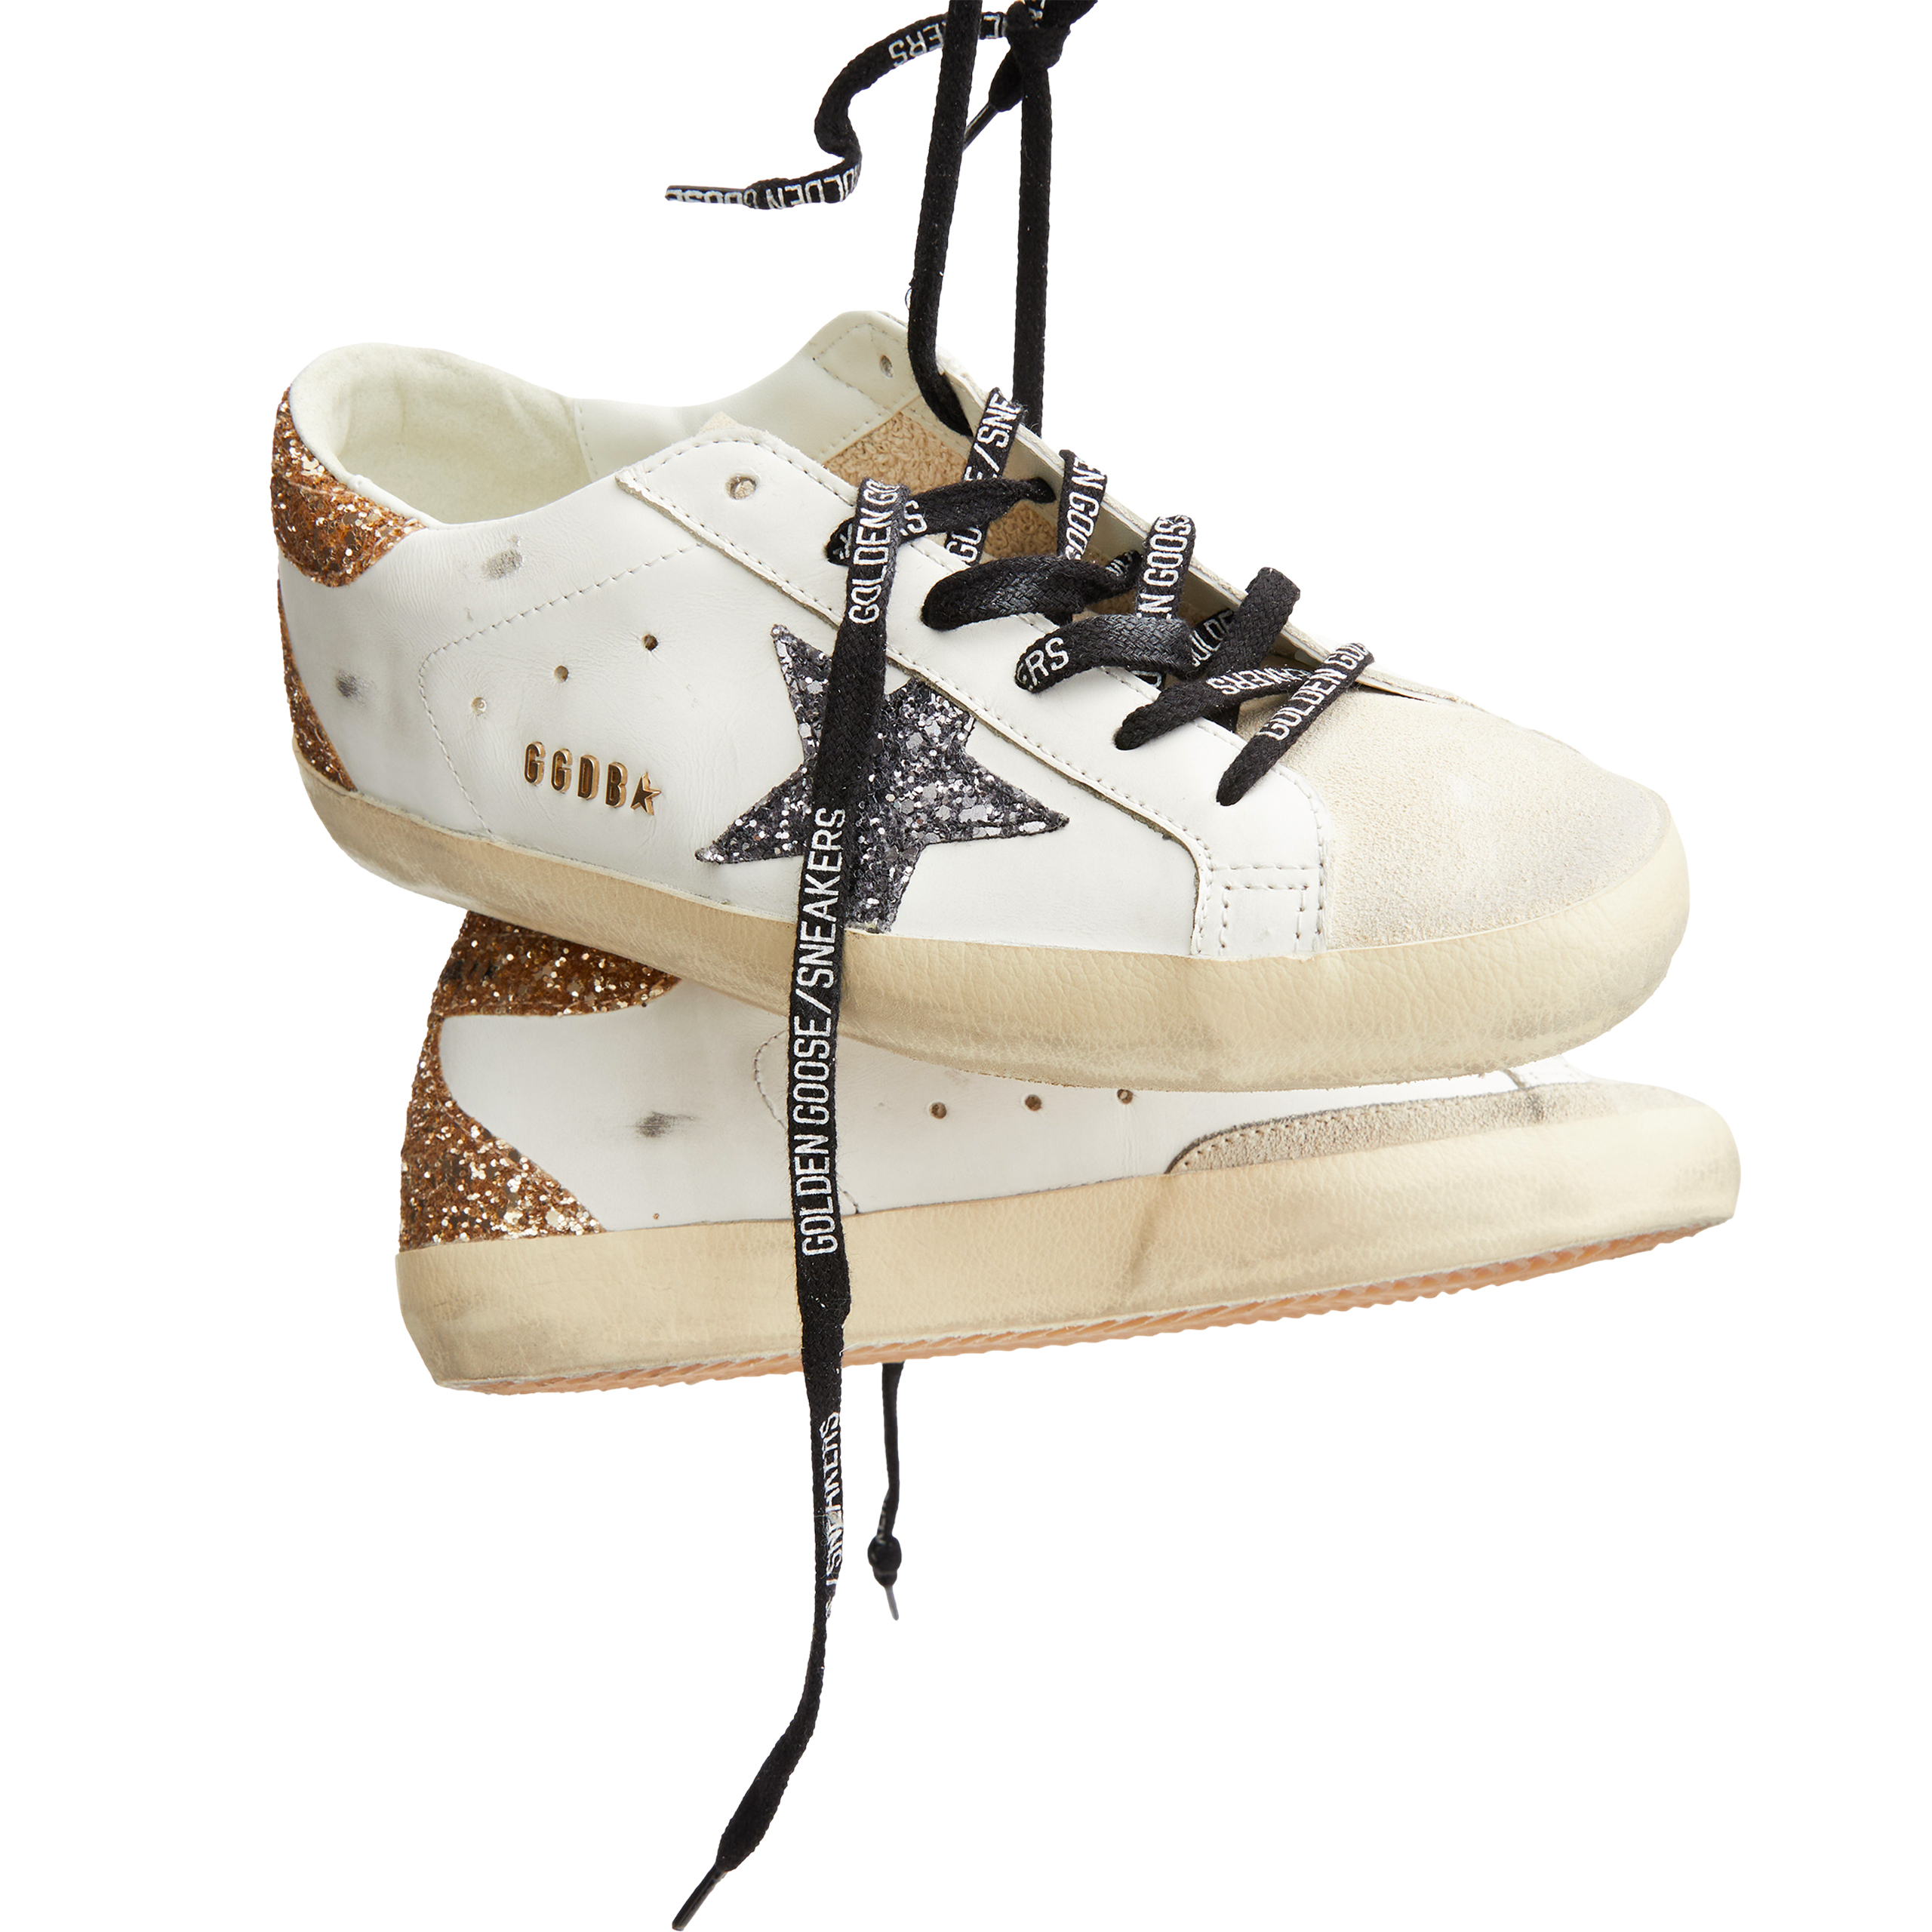 None Golden Goose Deluxe Brand GWF00102/F005358/82532, размер 36;41 GWF00102/F005358/82532 - фото 2